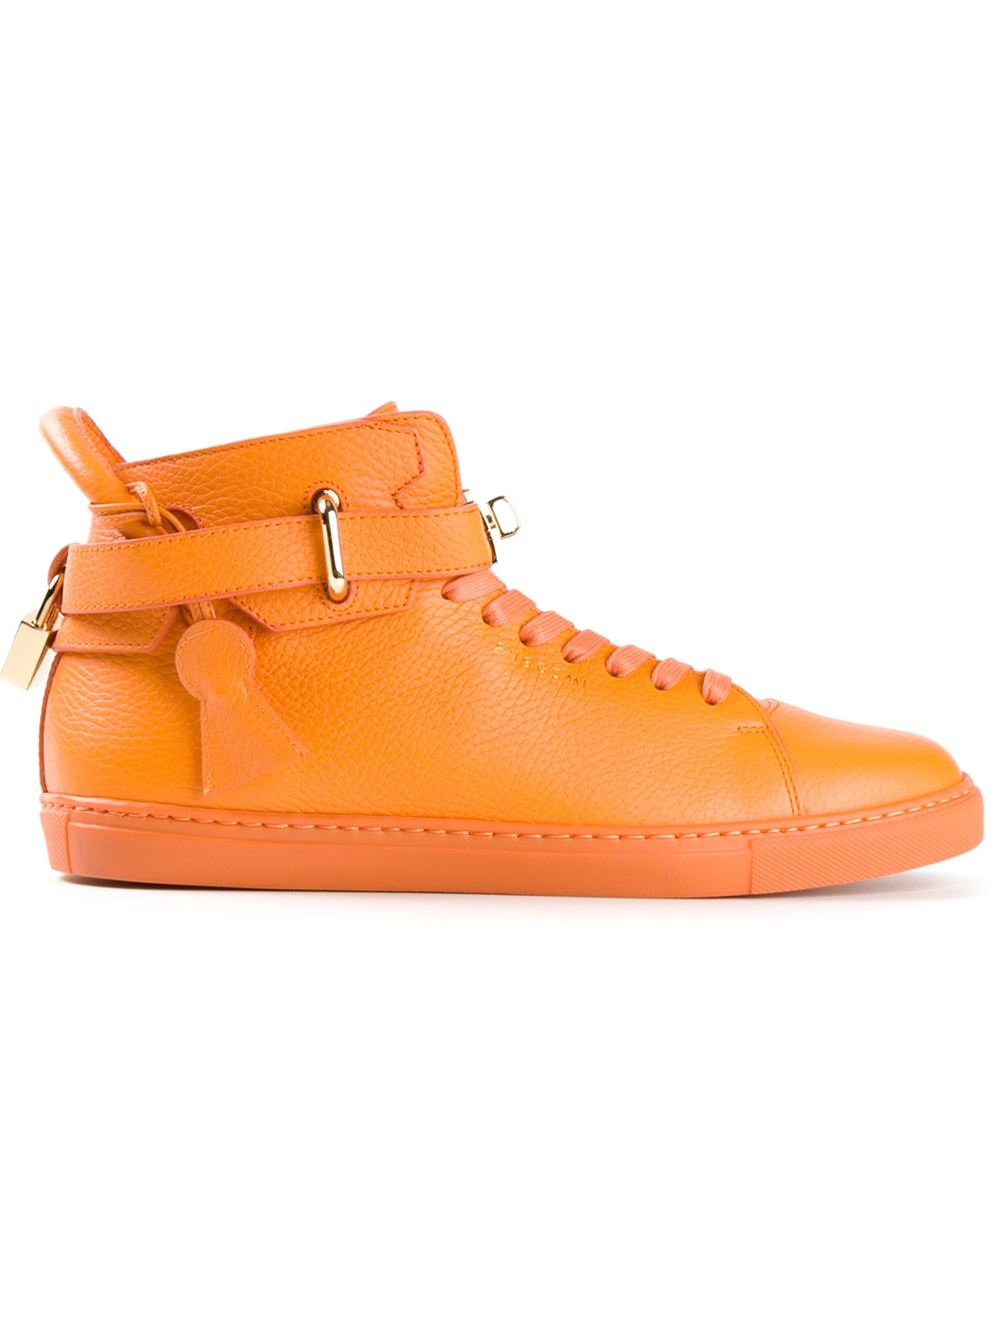 Lyst - Buscemi 100mm Leather Lace-Up Sneakers in Orange for Men